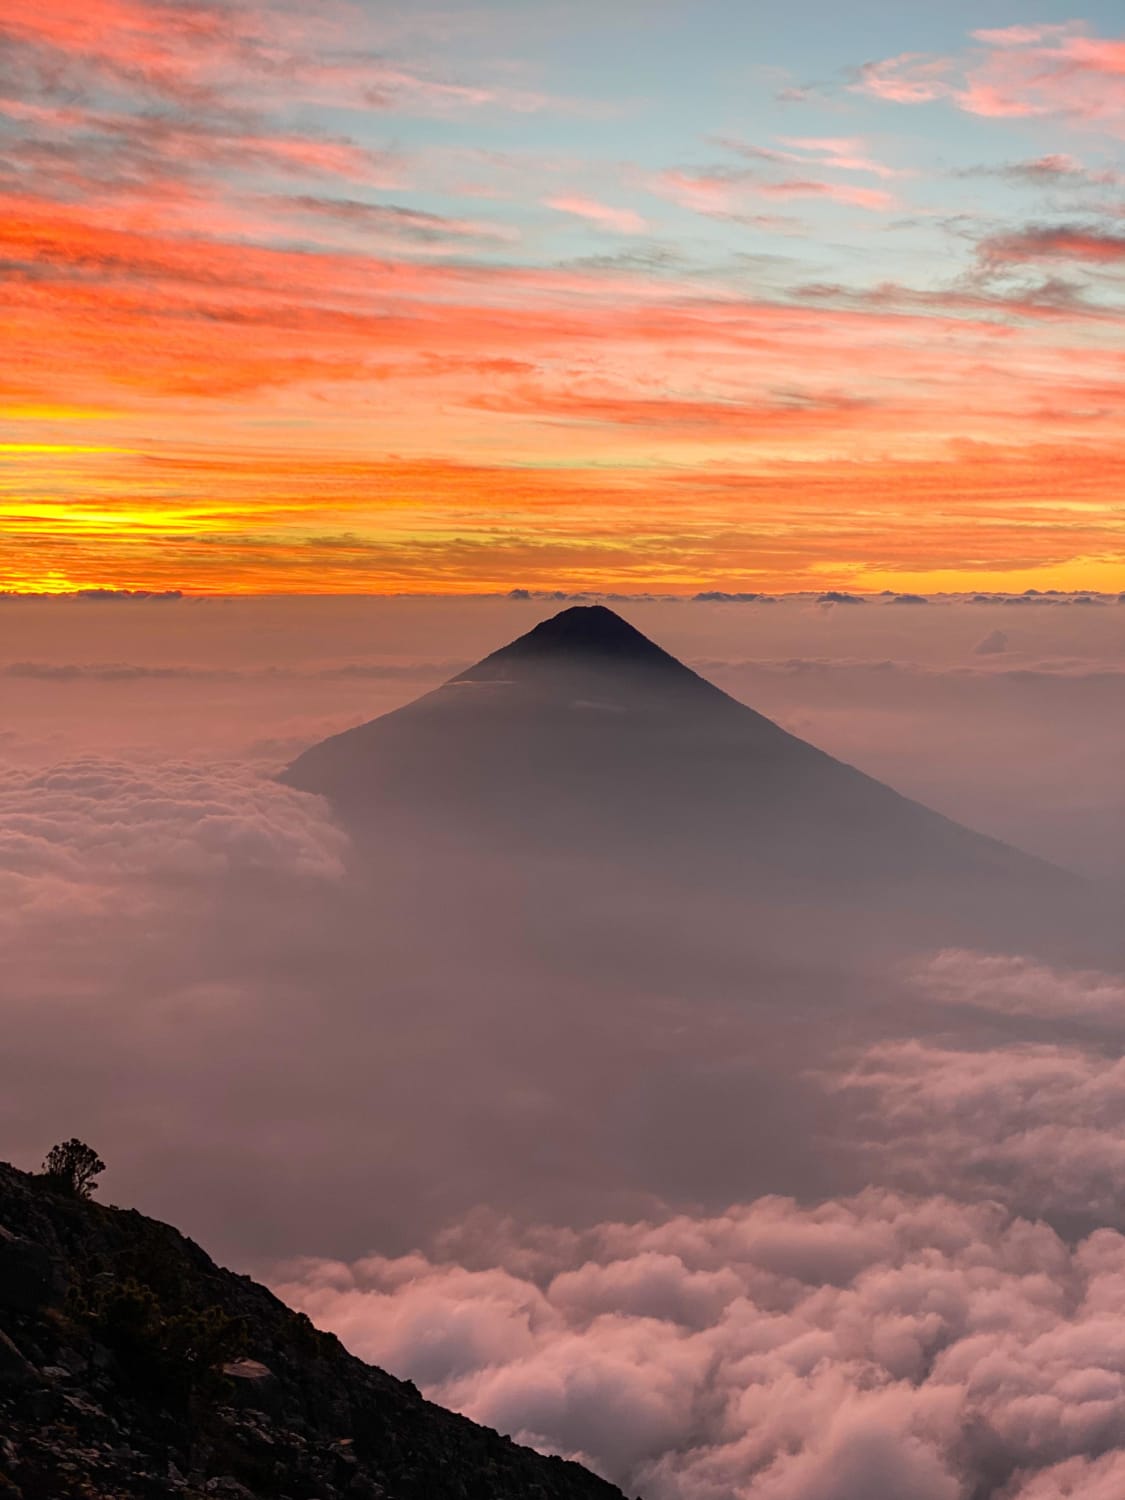 One of the most beautiful sunrises I have ever seen. This was taken from the top of the Acatenango Volcano in Guatemala 🌋. Where have you seen the best sunrise?